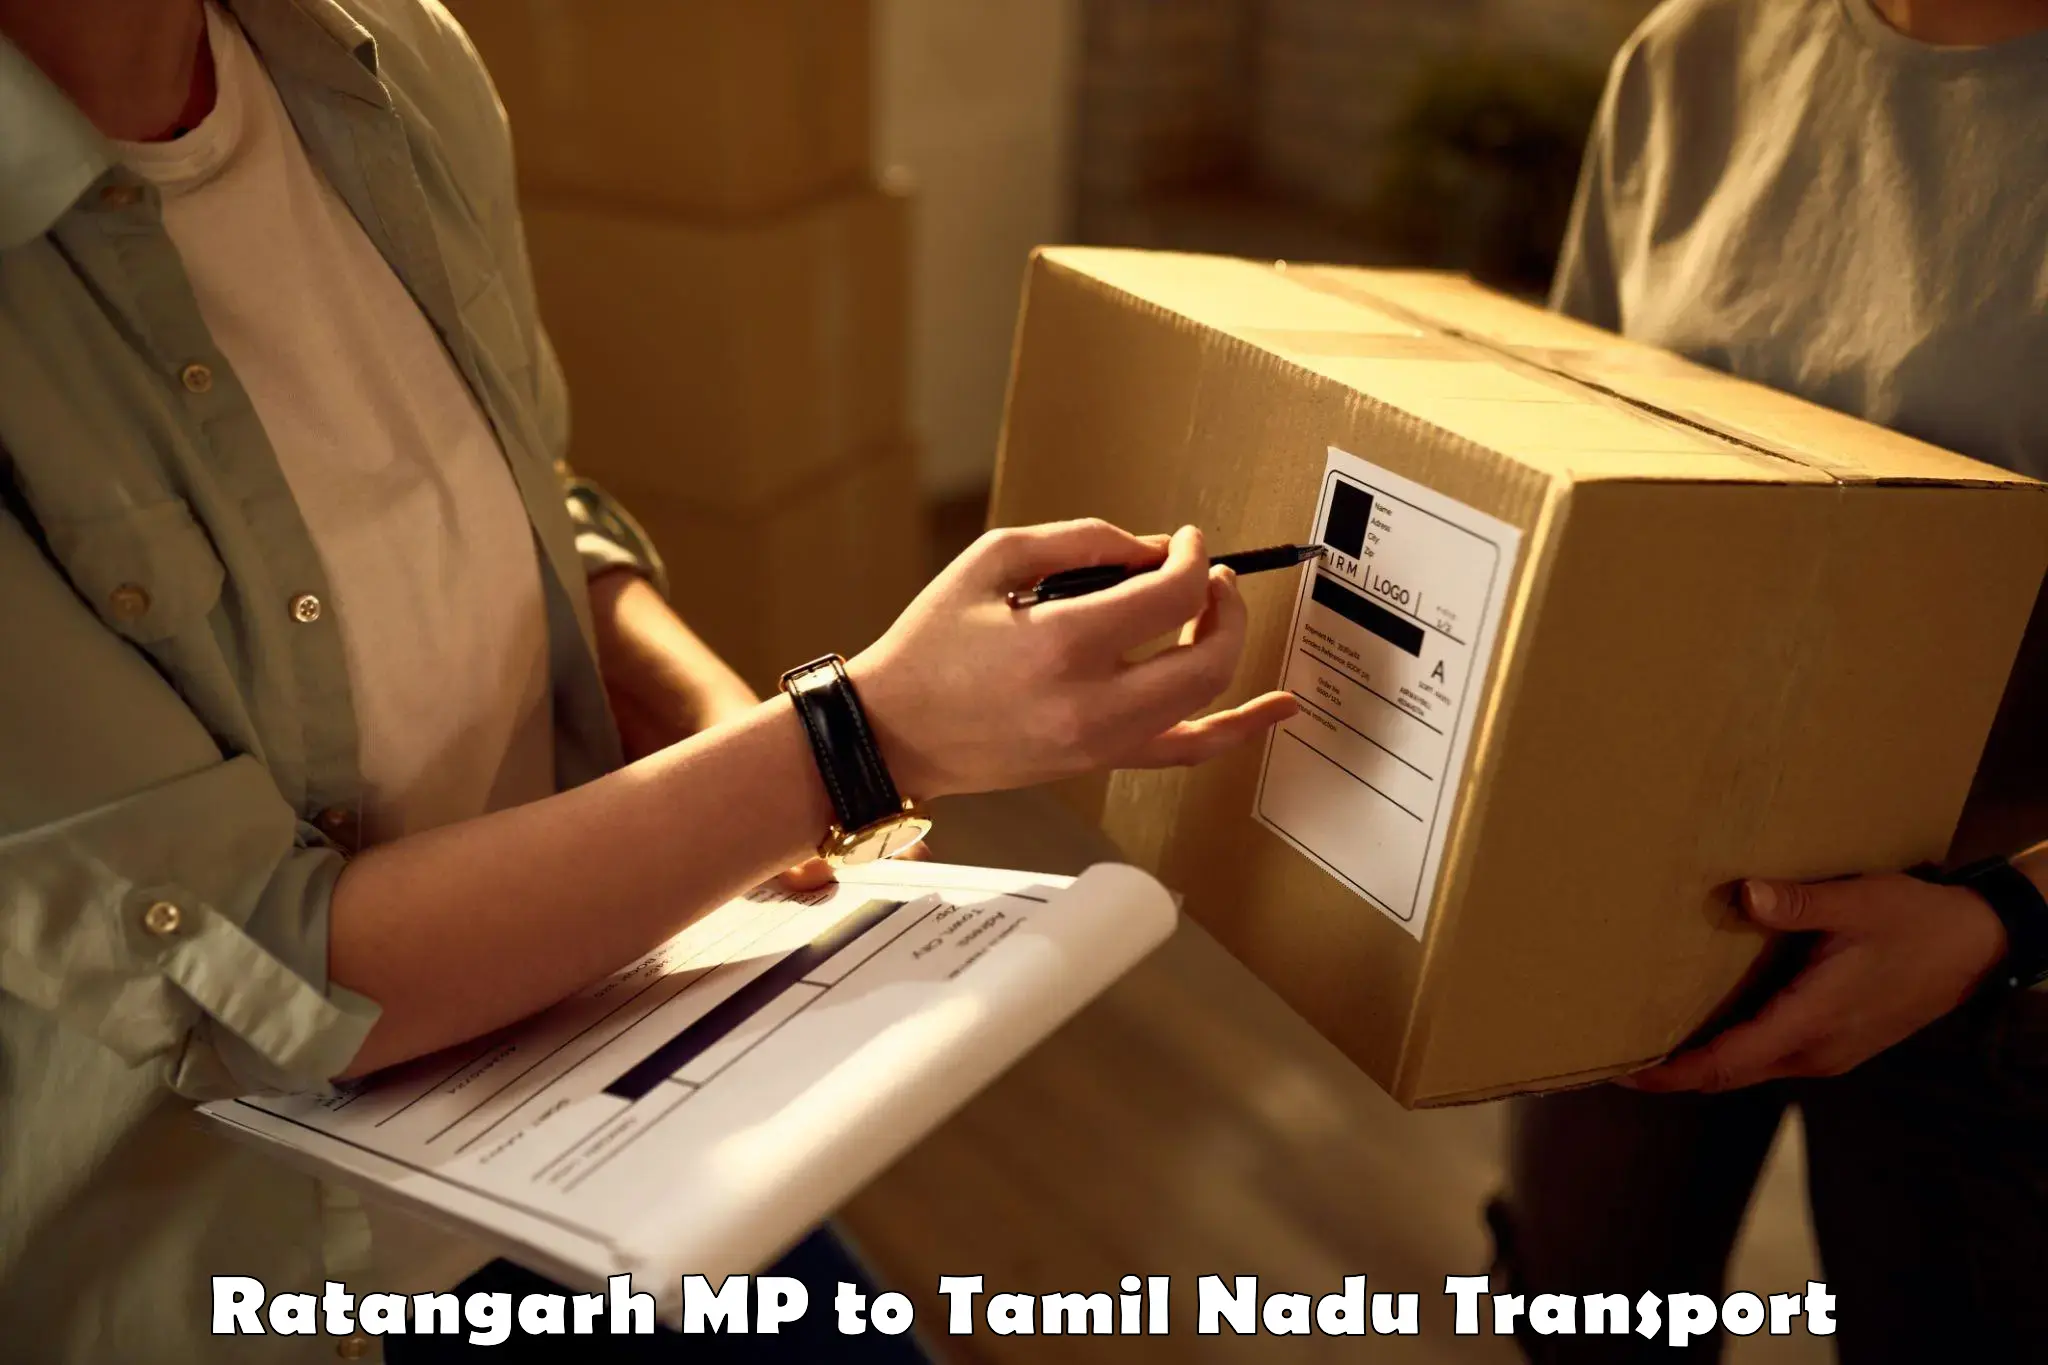 Package delivery services Ratangarh MP to Perambalur